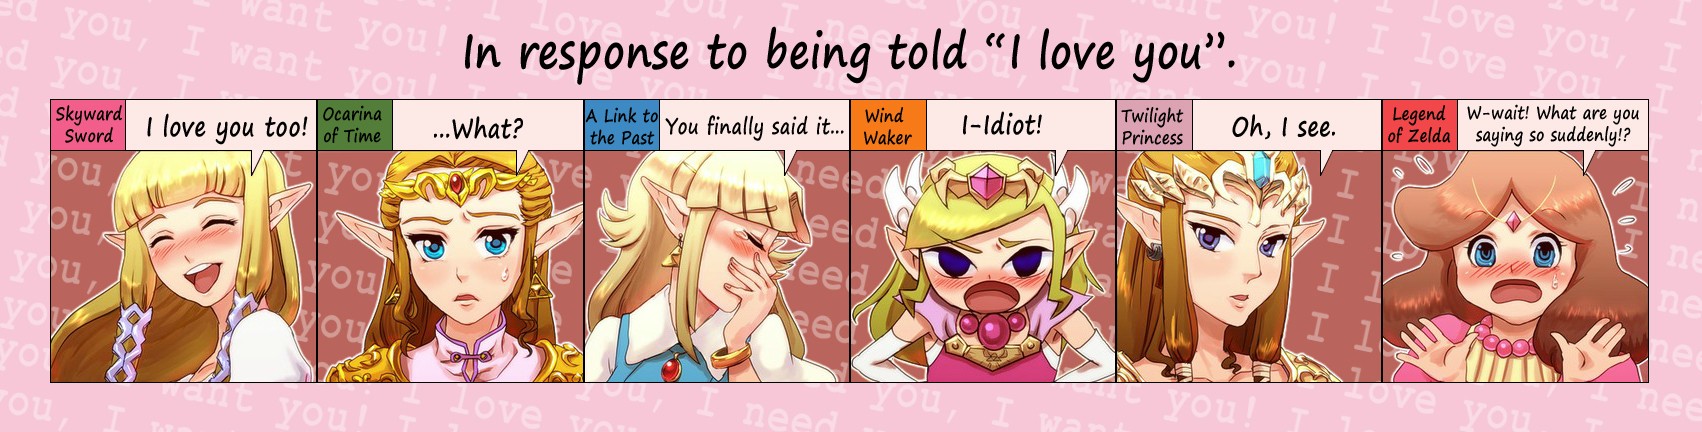 Zelda’s expressions and answers after a declaration of love.